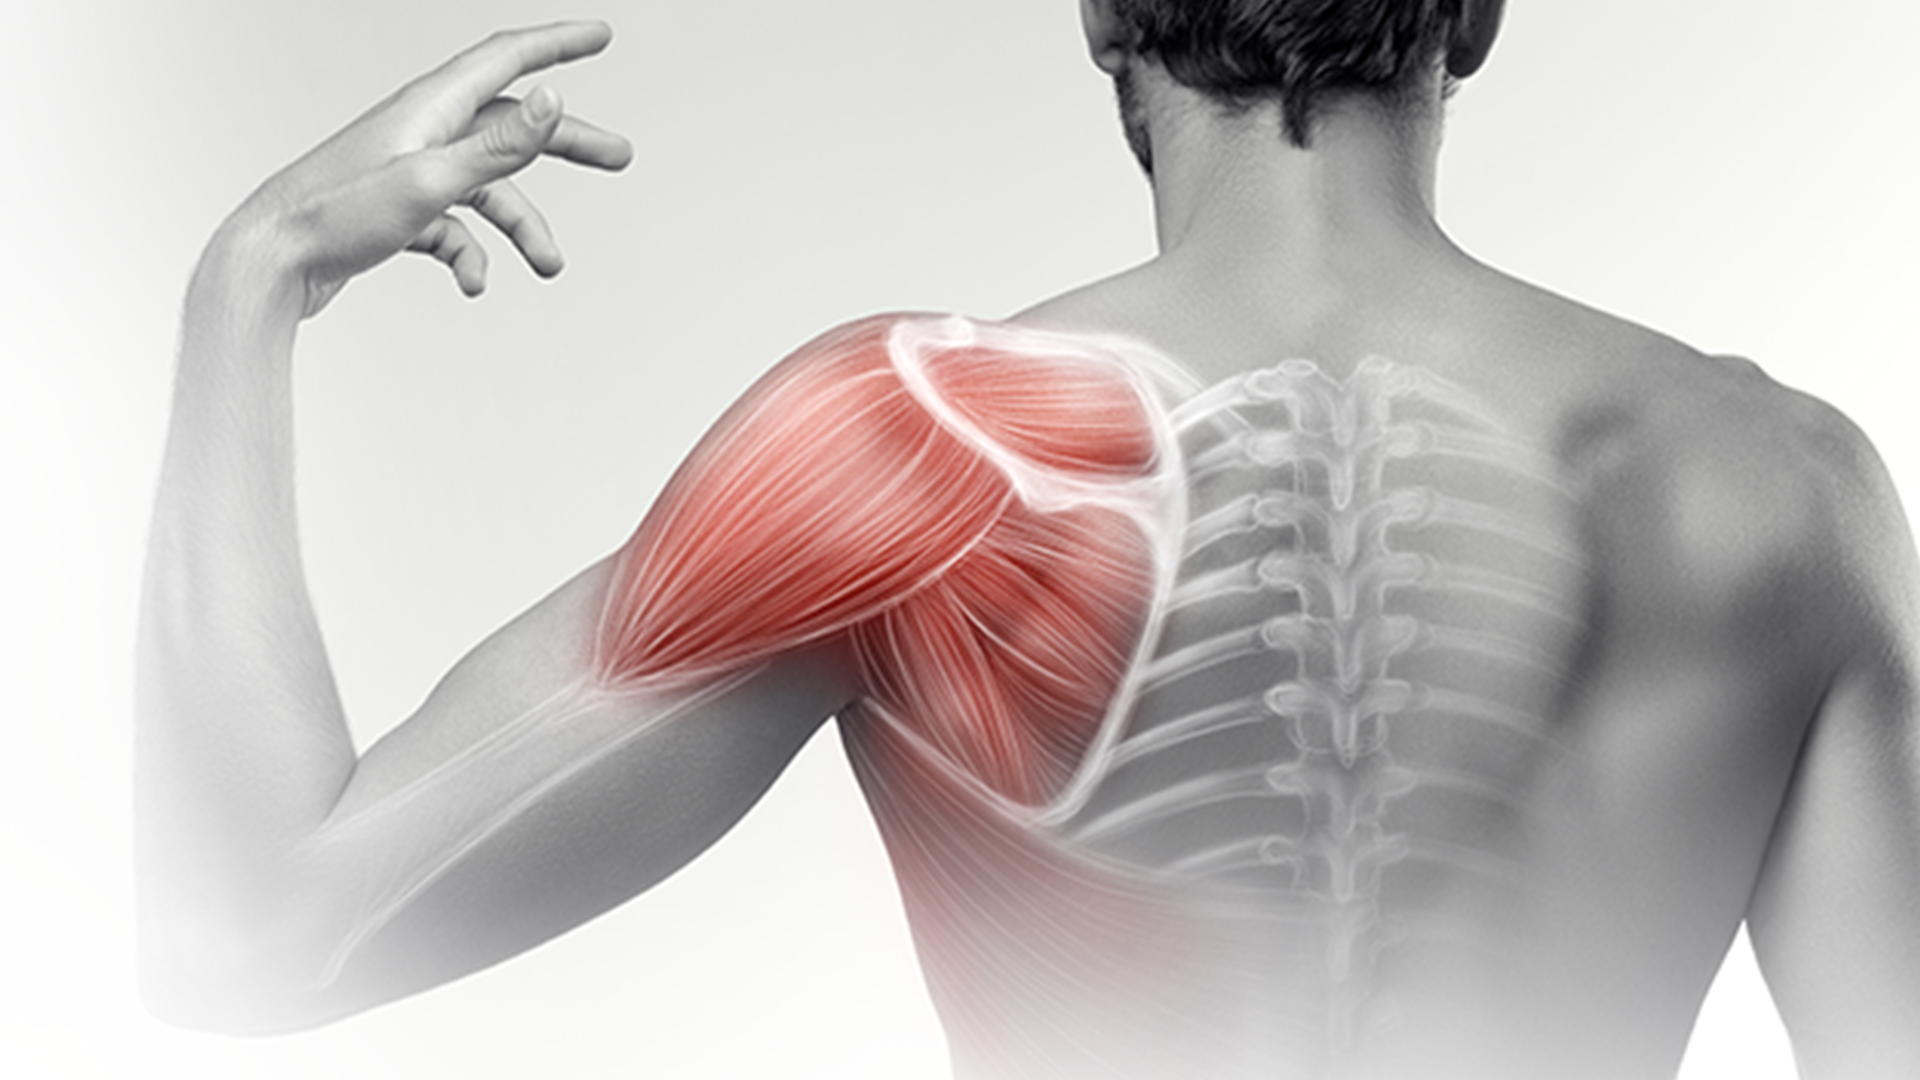 Shoulder Pain - What investigations should I order? - Sports Clinic NQ